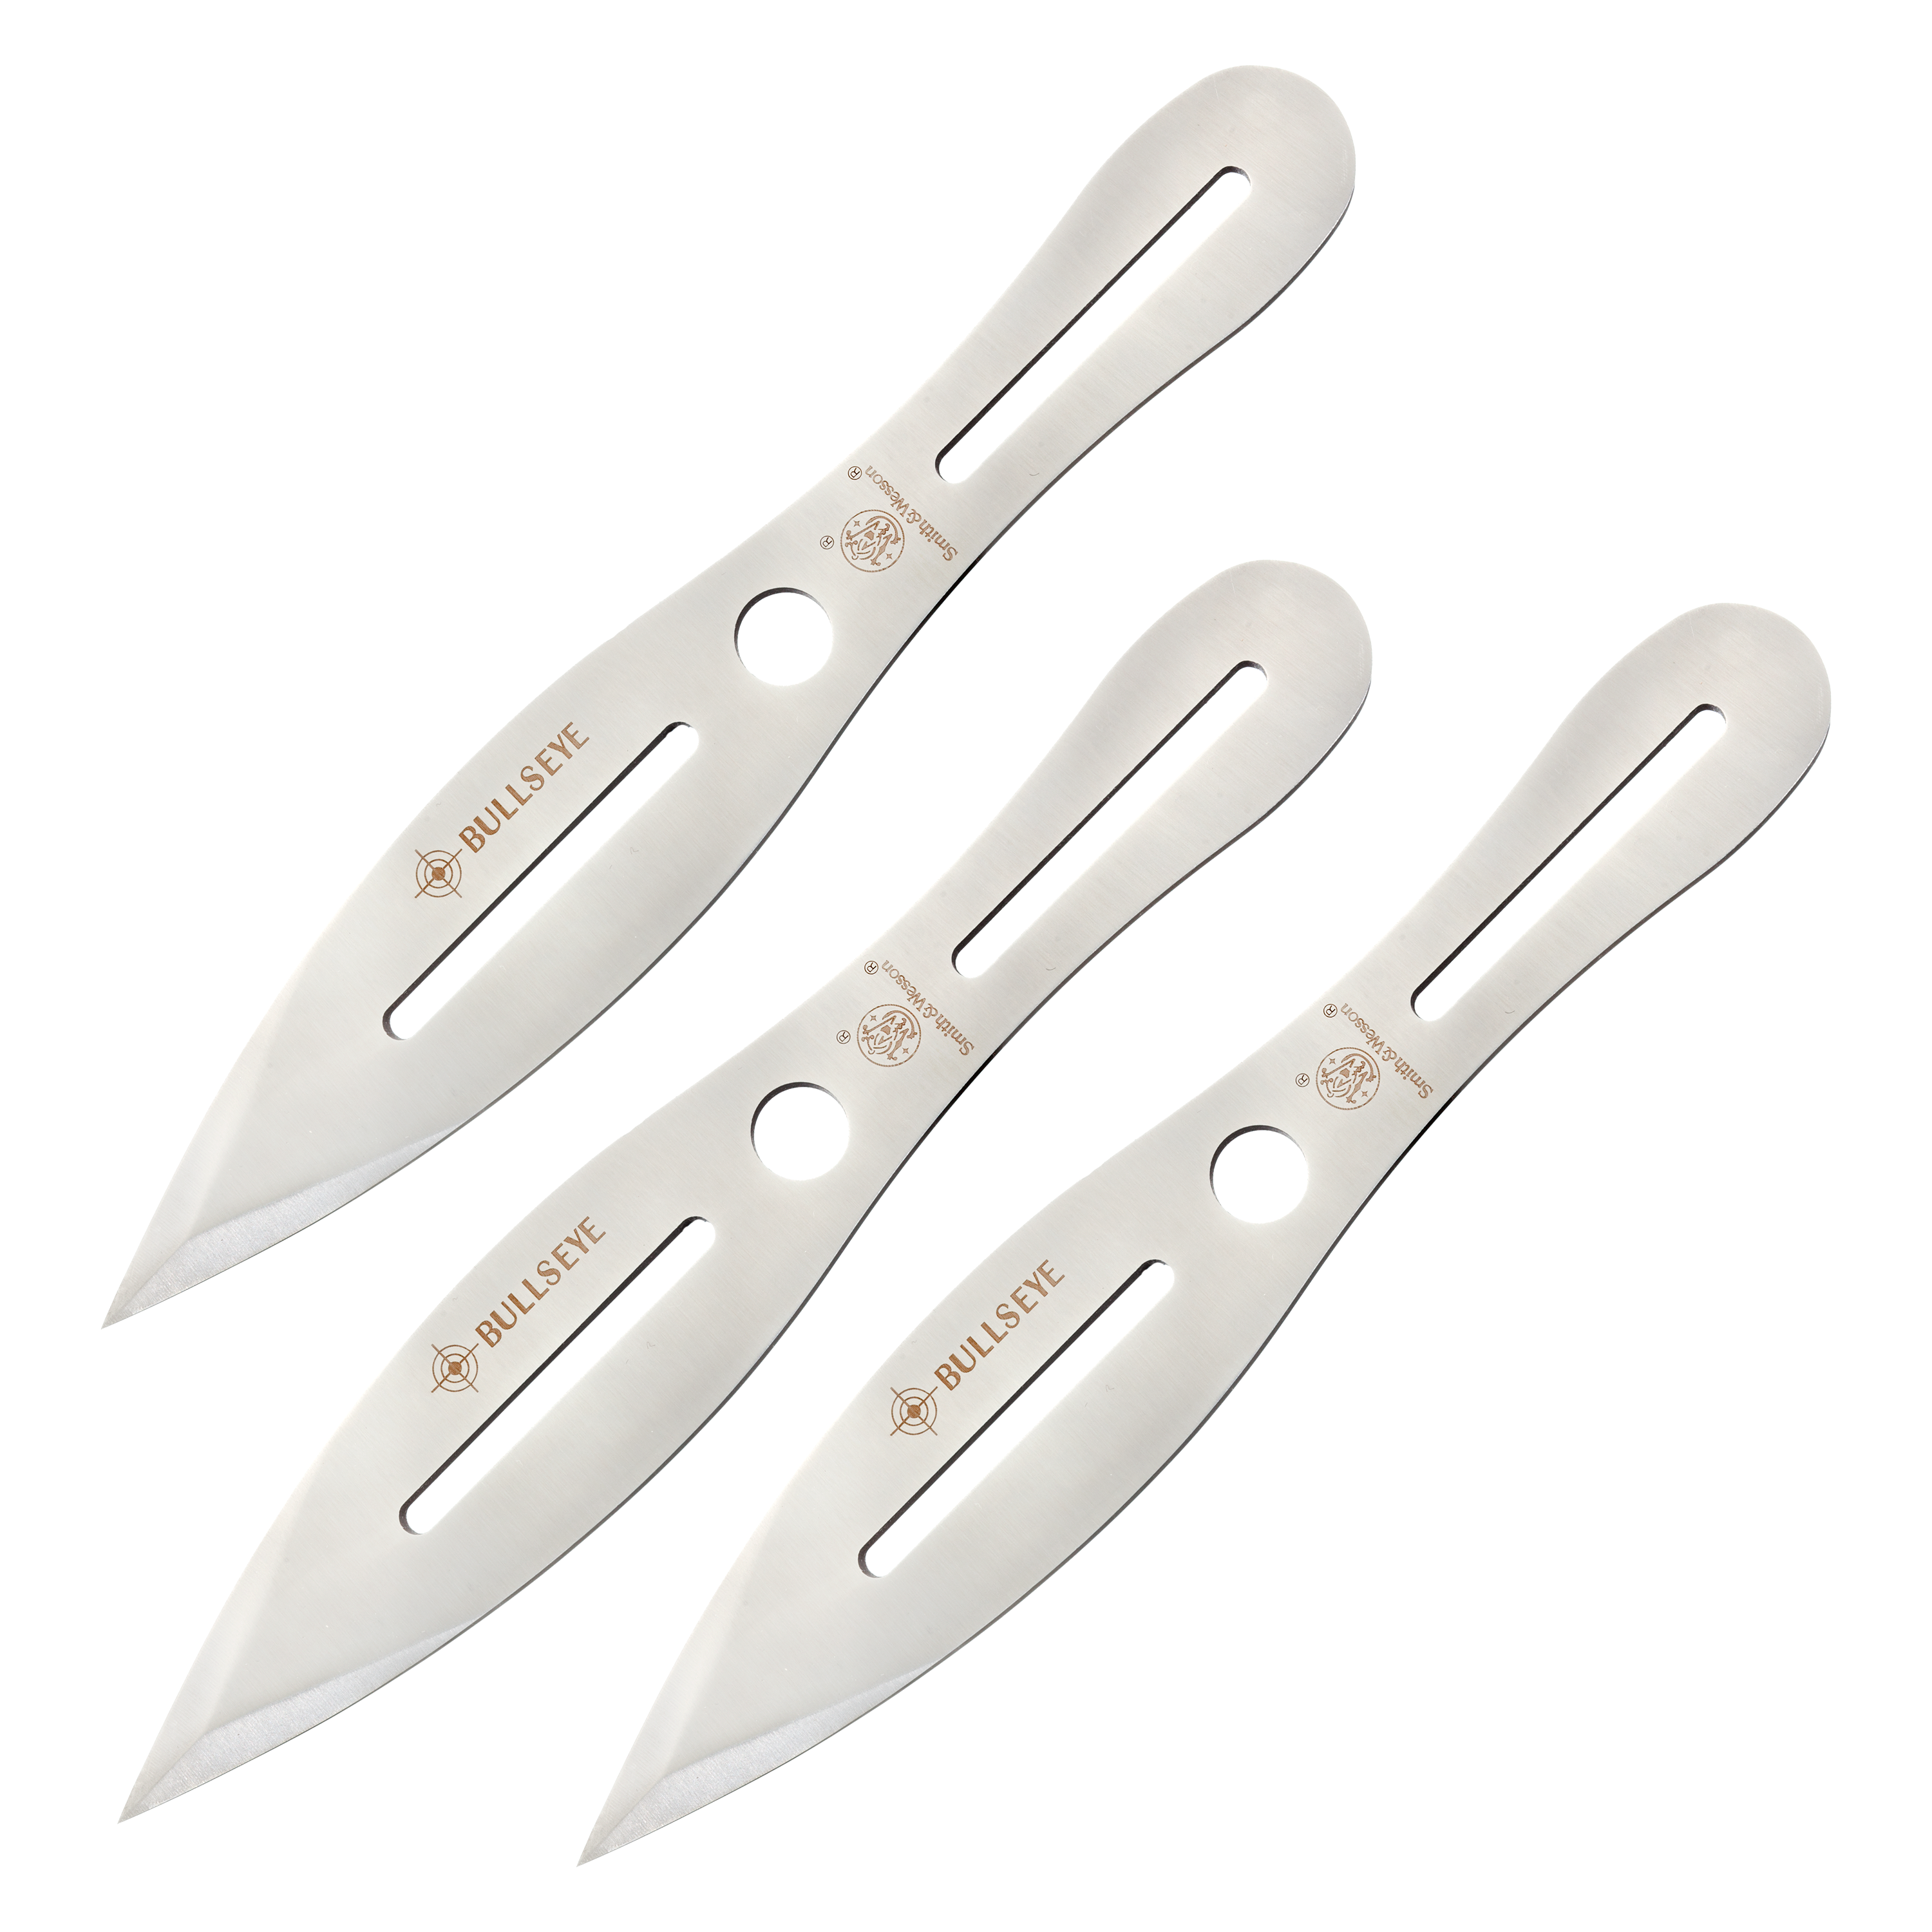 Smith &Wesson Bullseye Throwing Knife Set - 10' - 3-Pack